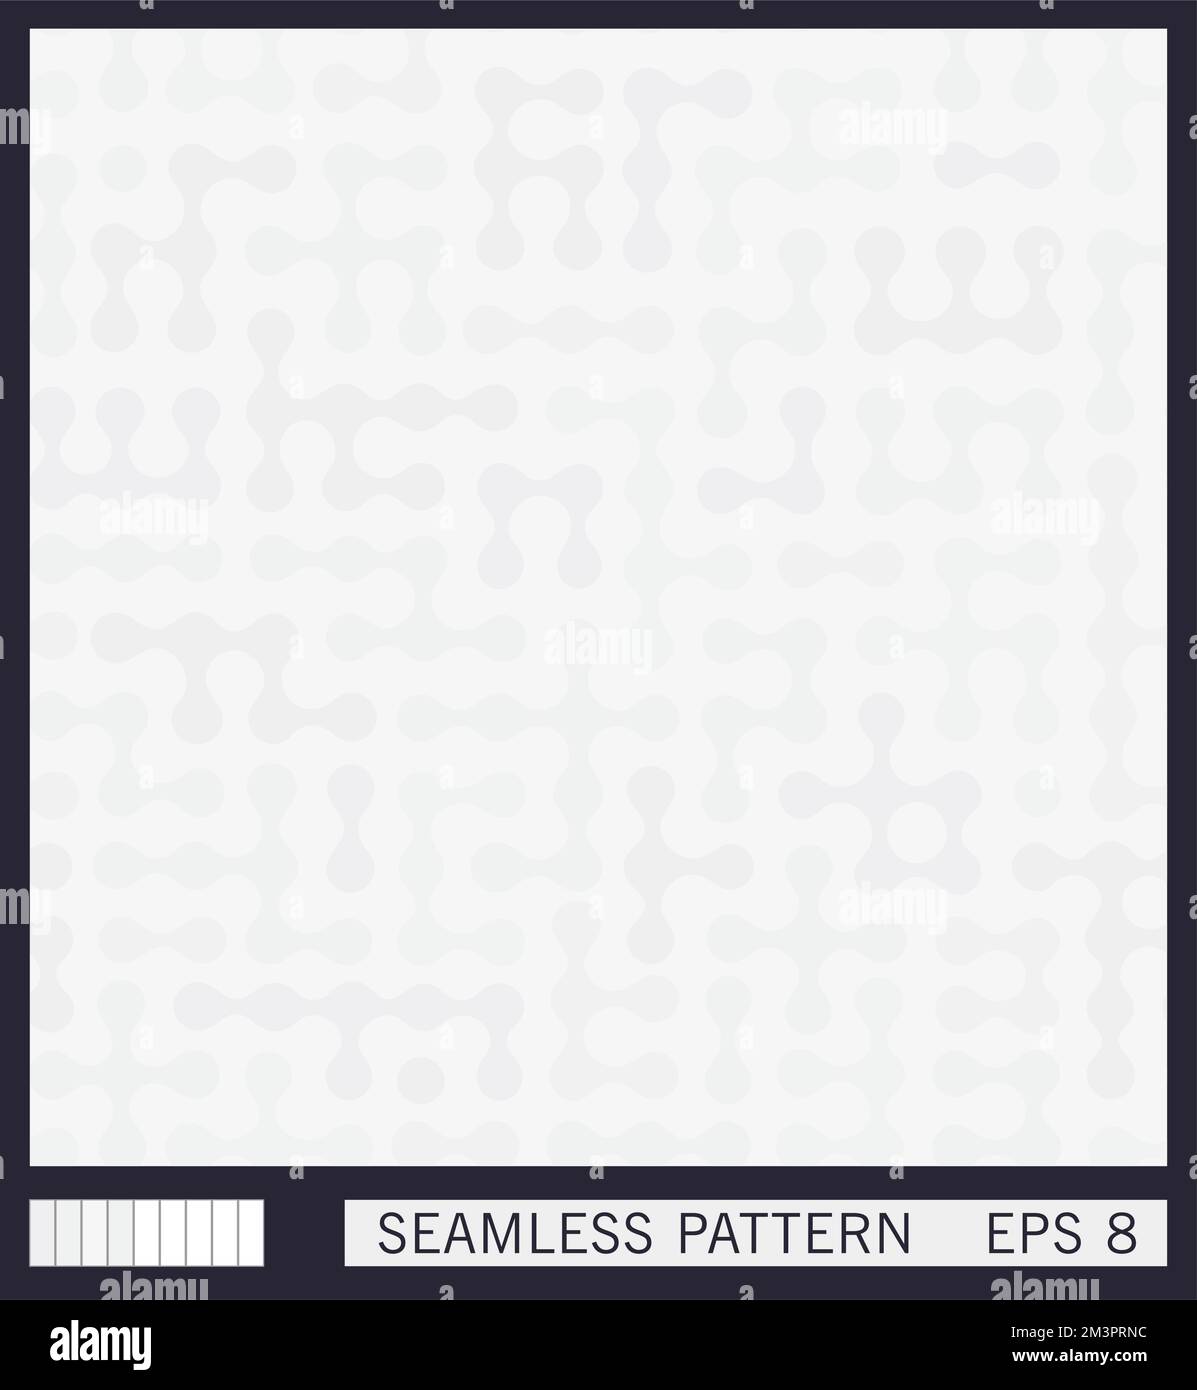 Seamless pattern. Imitation of watercolor paper texture. Smoothly fused dots and elements. Vector graphics Stock Vector